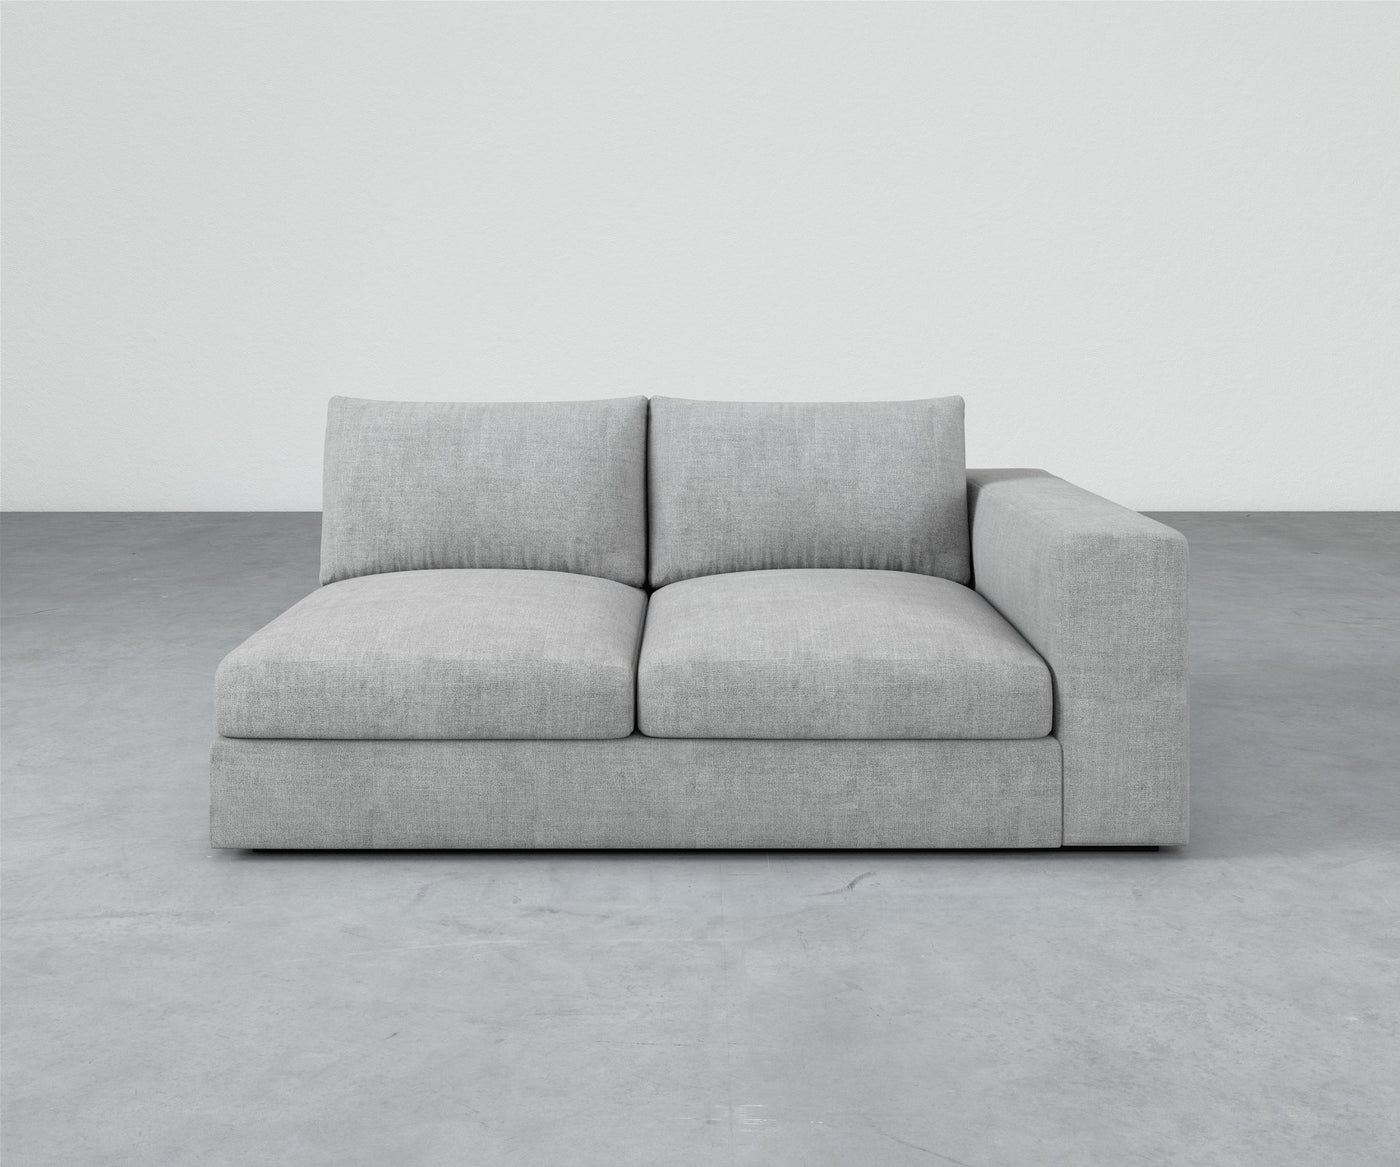 Tuxxy One-Arm Loveseat - Modular Component